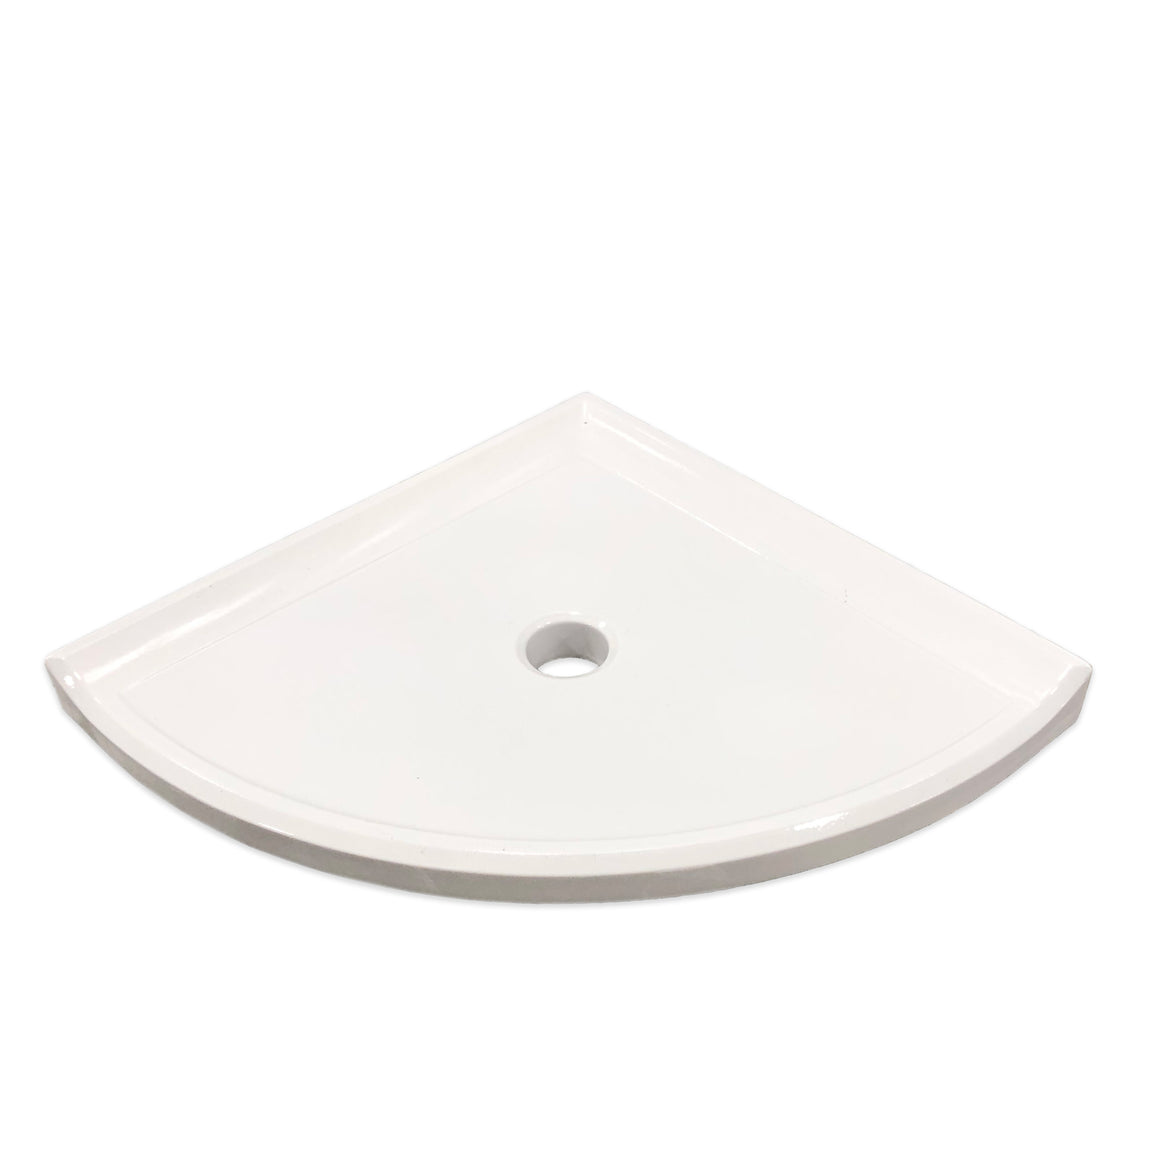 8" Polished White Ceramic Corner Shelf Elegant Shower Shelf with a Drain Hole (Two sided Tapes Included) - Marble Barn